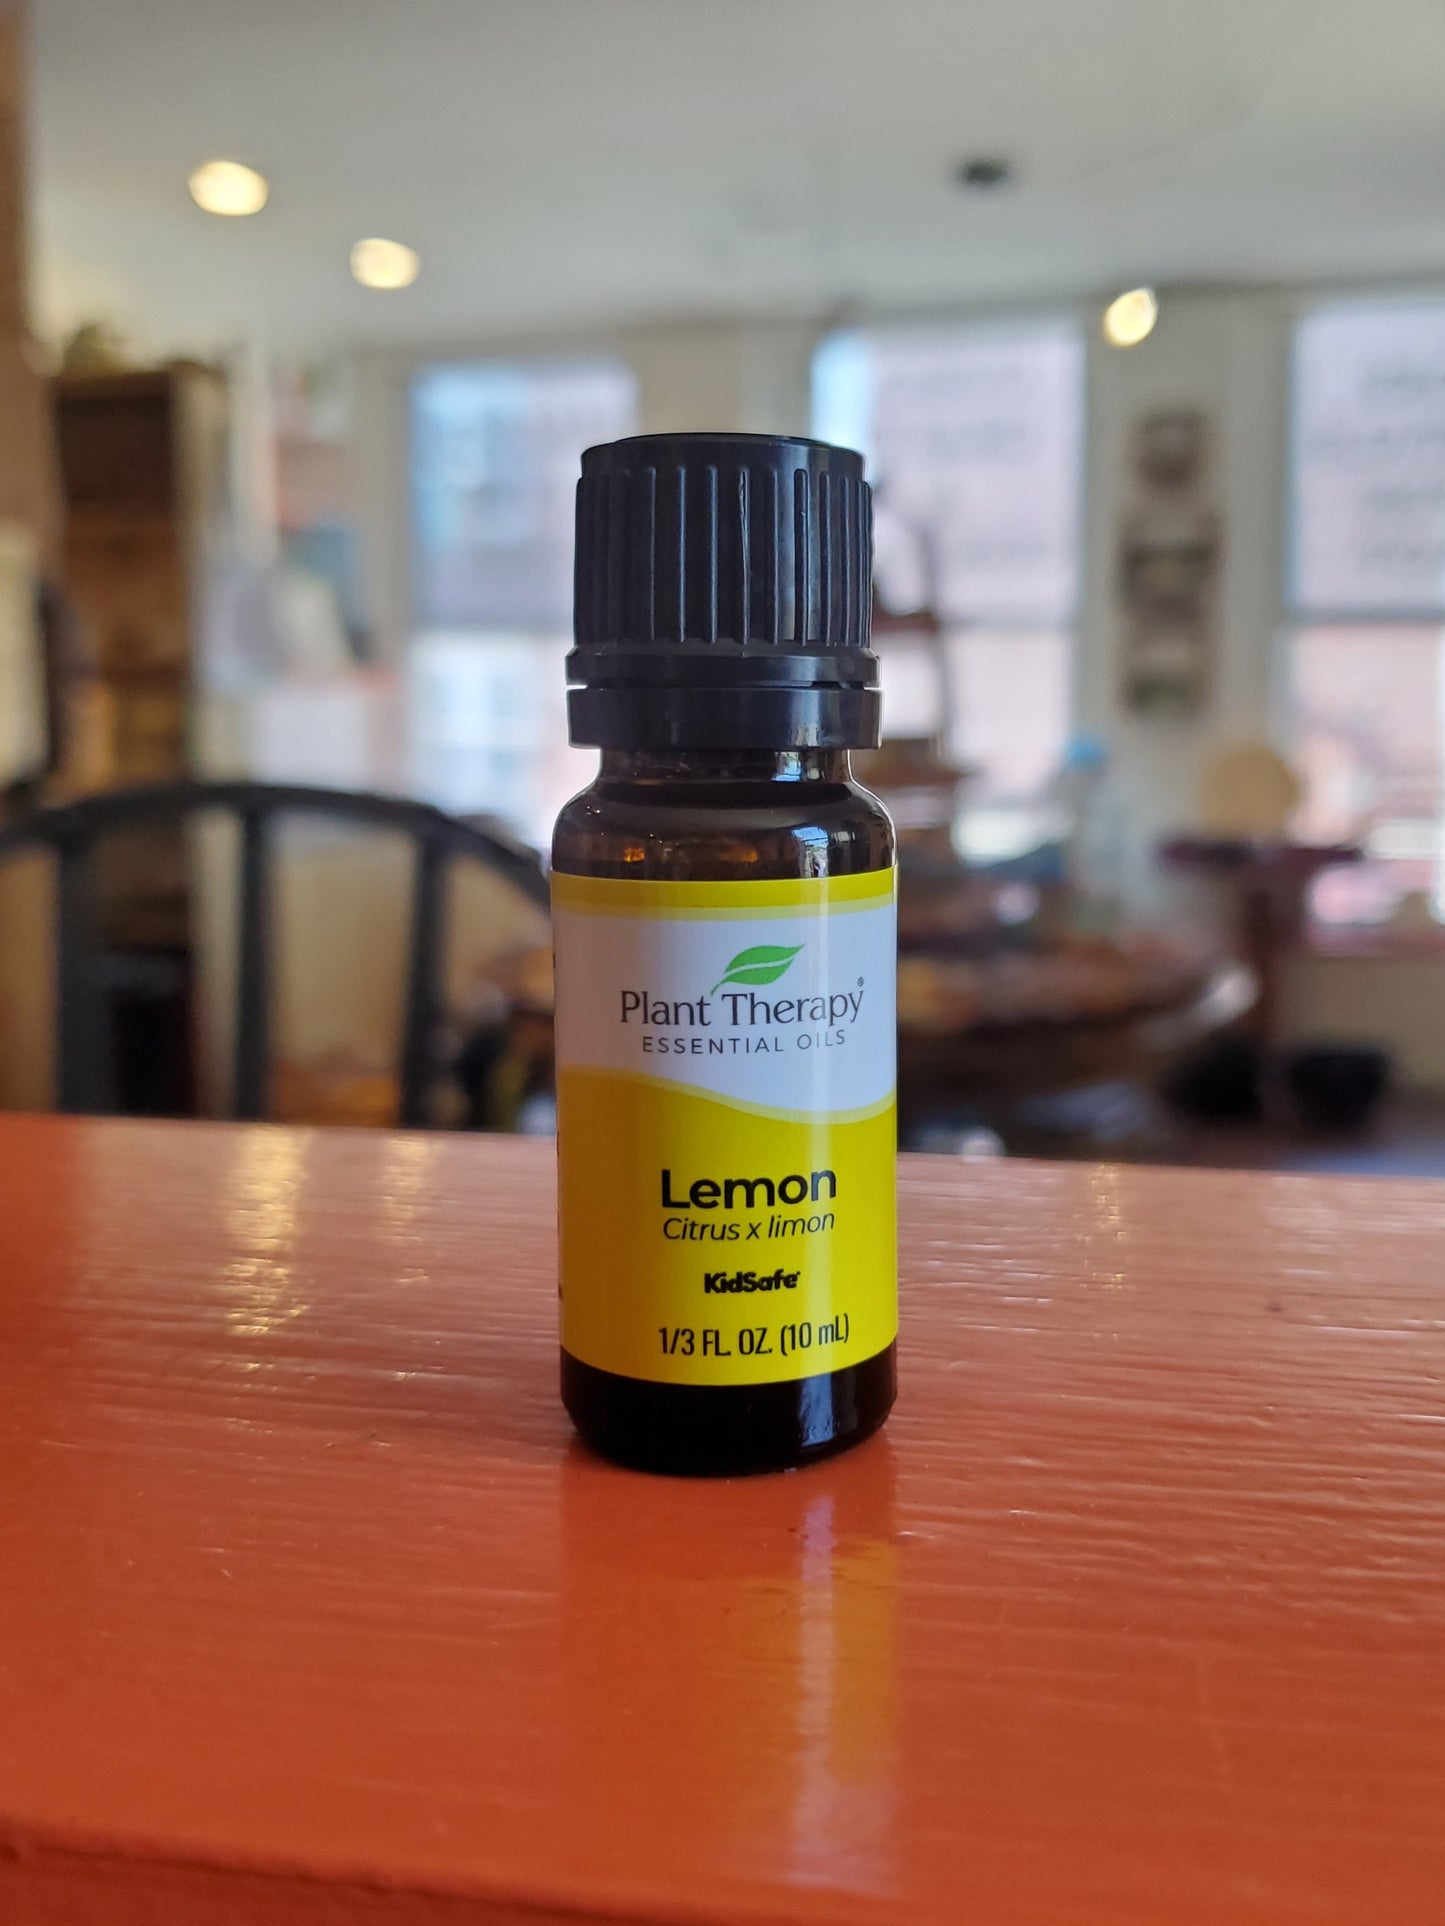 Plant Therapy Essential Oils - 10 mL